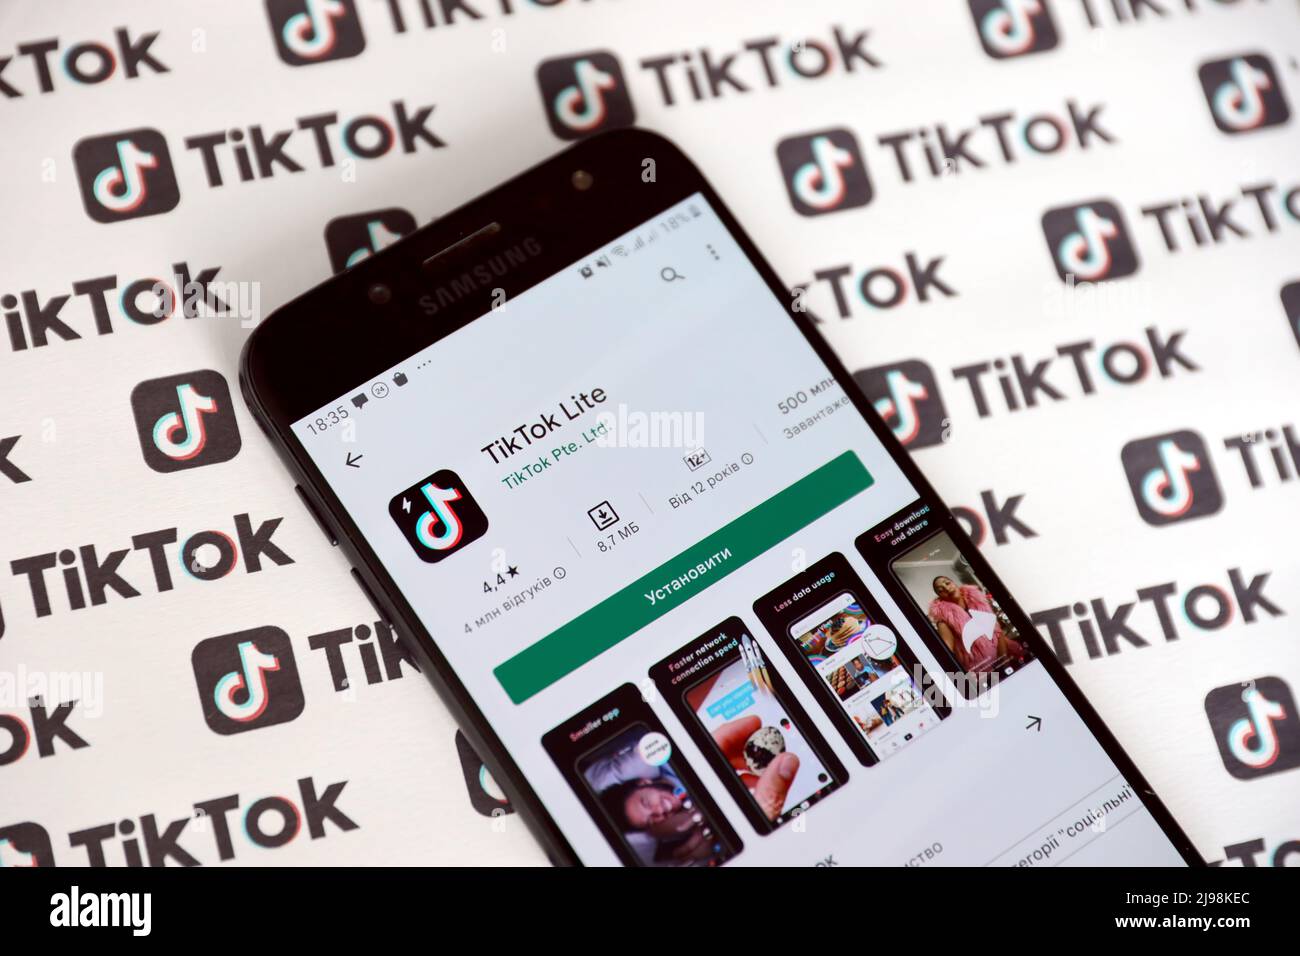 TERNOPIL, UKRAINE - MAY 2, 2022: Tik Tok smartphone app on screen and Many TikTok logo printed on paper. Tiktok or Douyin is a famous Chinese short-fo Stock Photo